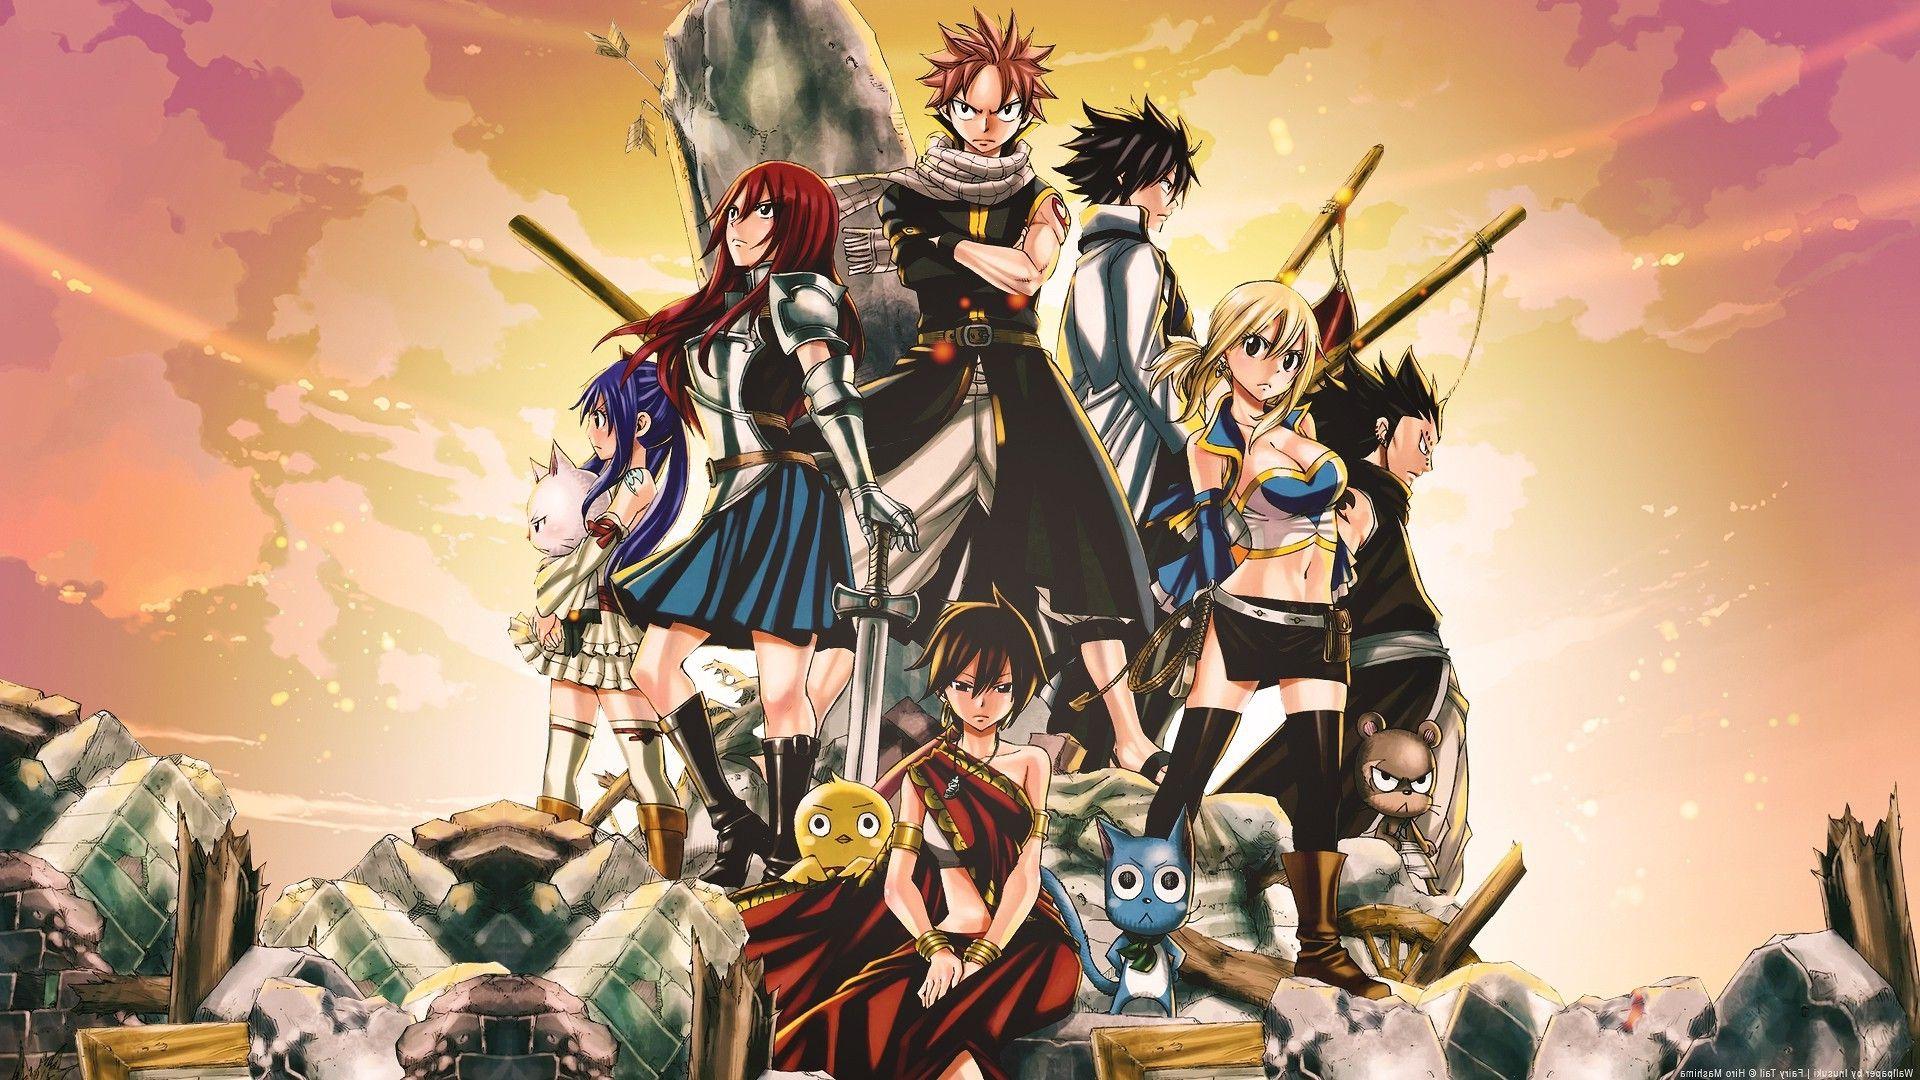 Fairy Tail Anime Wallpapers Top Free Fairy Tail Anime